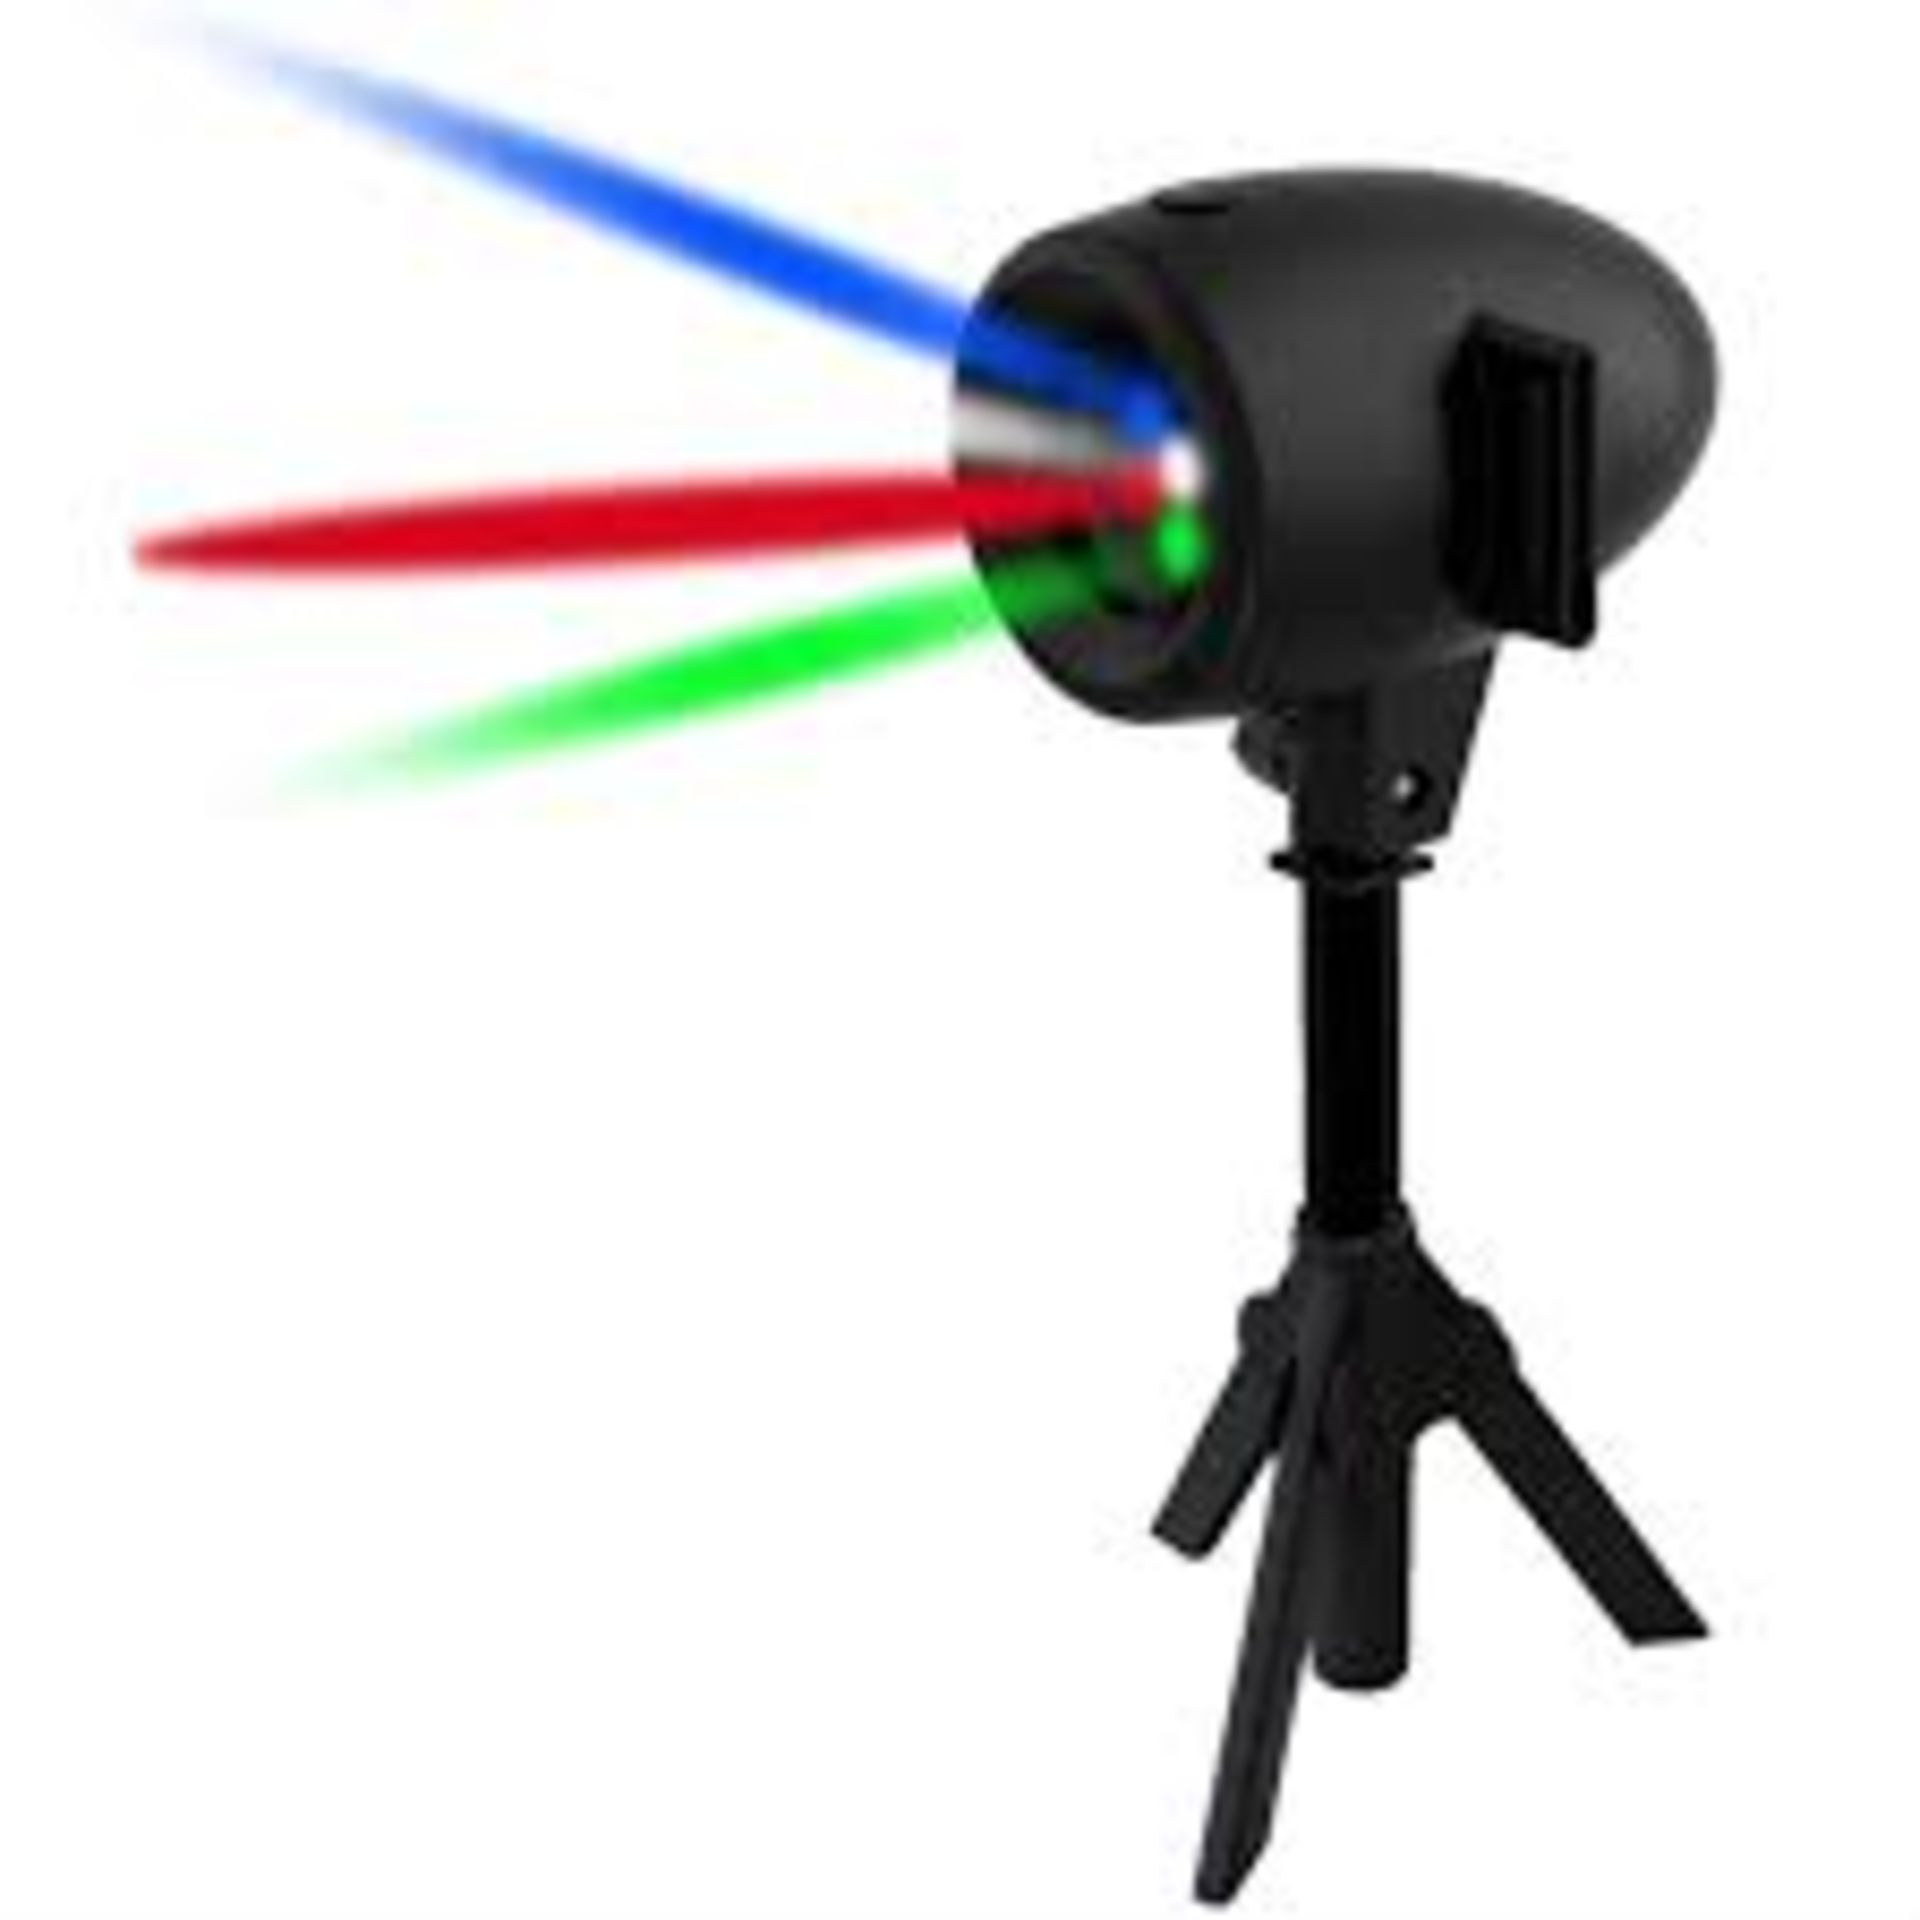 3 x StarTastic Motion Laser Projectors - Starry Light Display Suitable For Christmas, Weddings, - Image 3 of 4